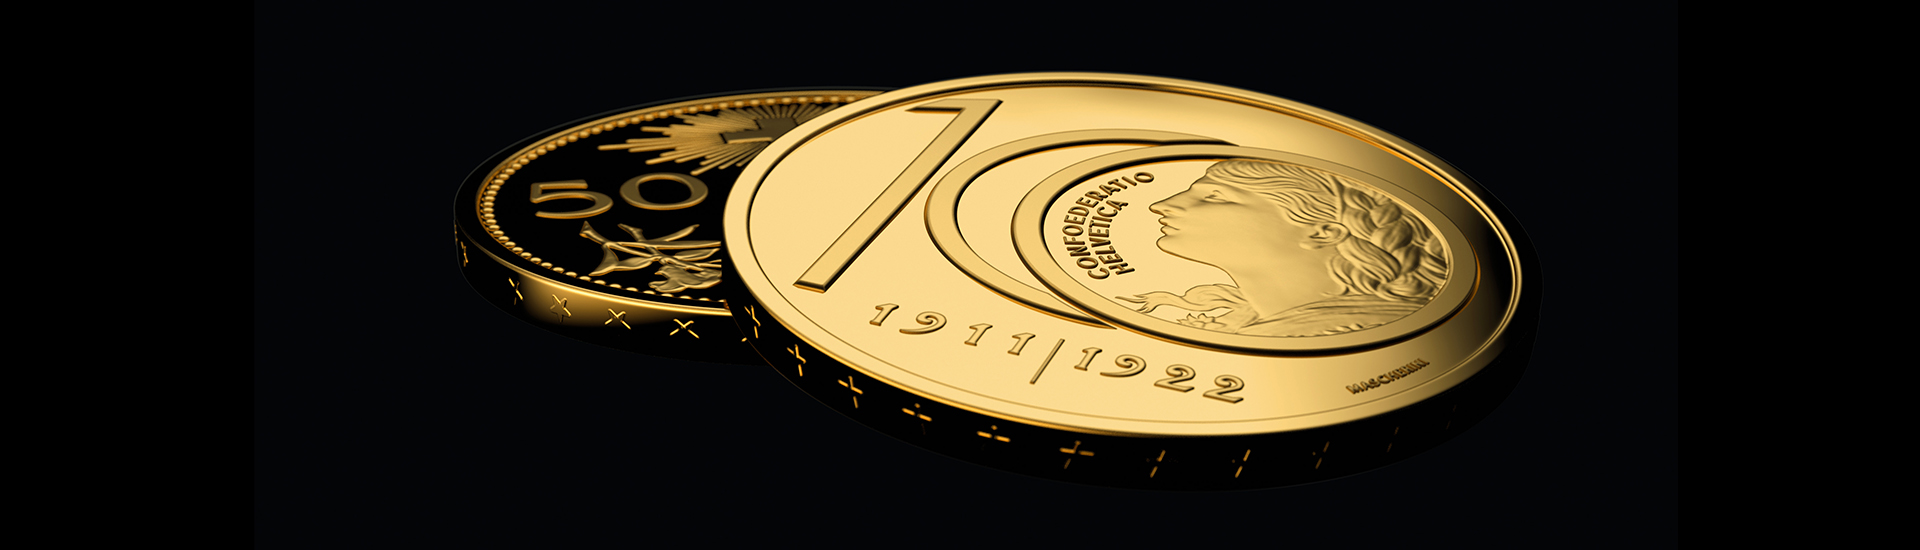 100 year anniversary of the gold Vreneli special coin